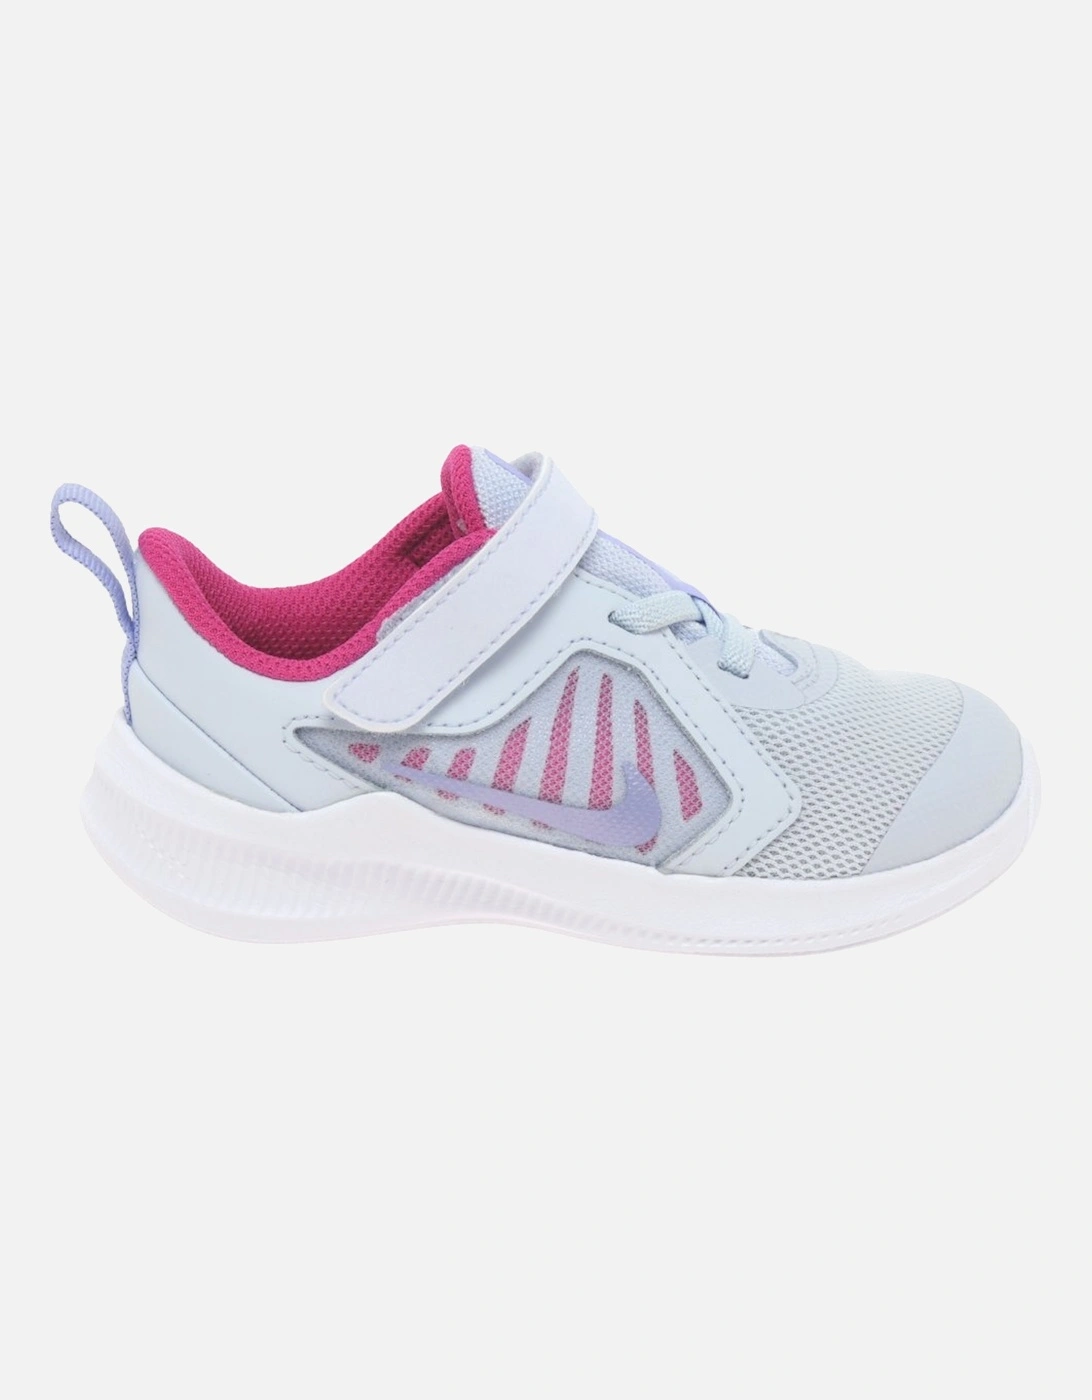 Downshifter 10 Girls Toddler Trainers